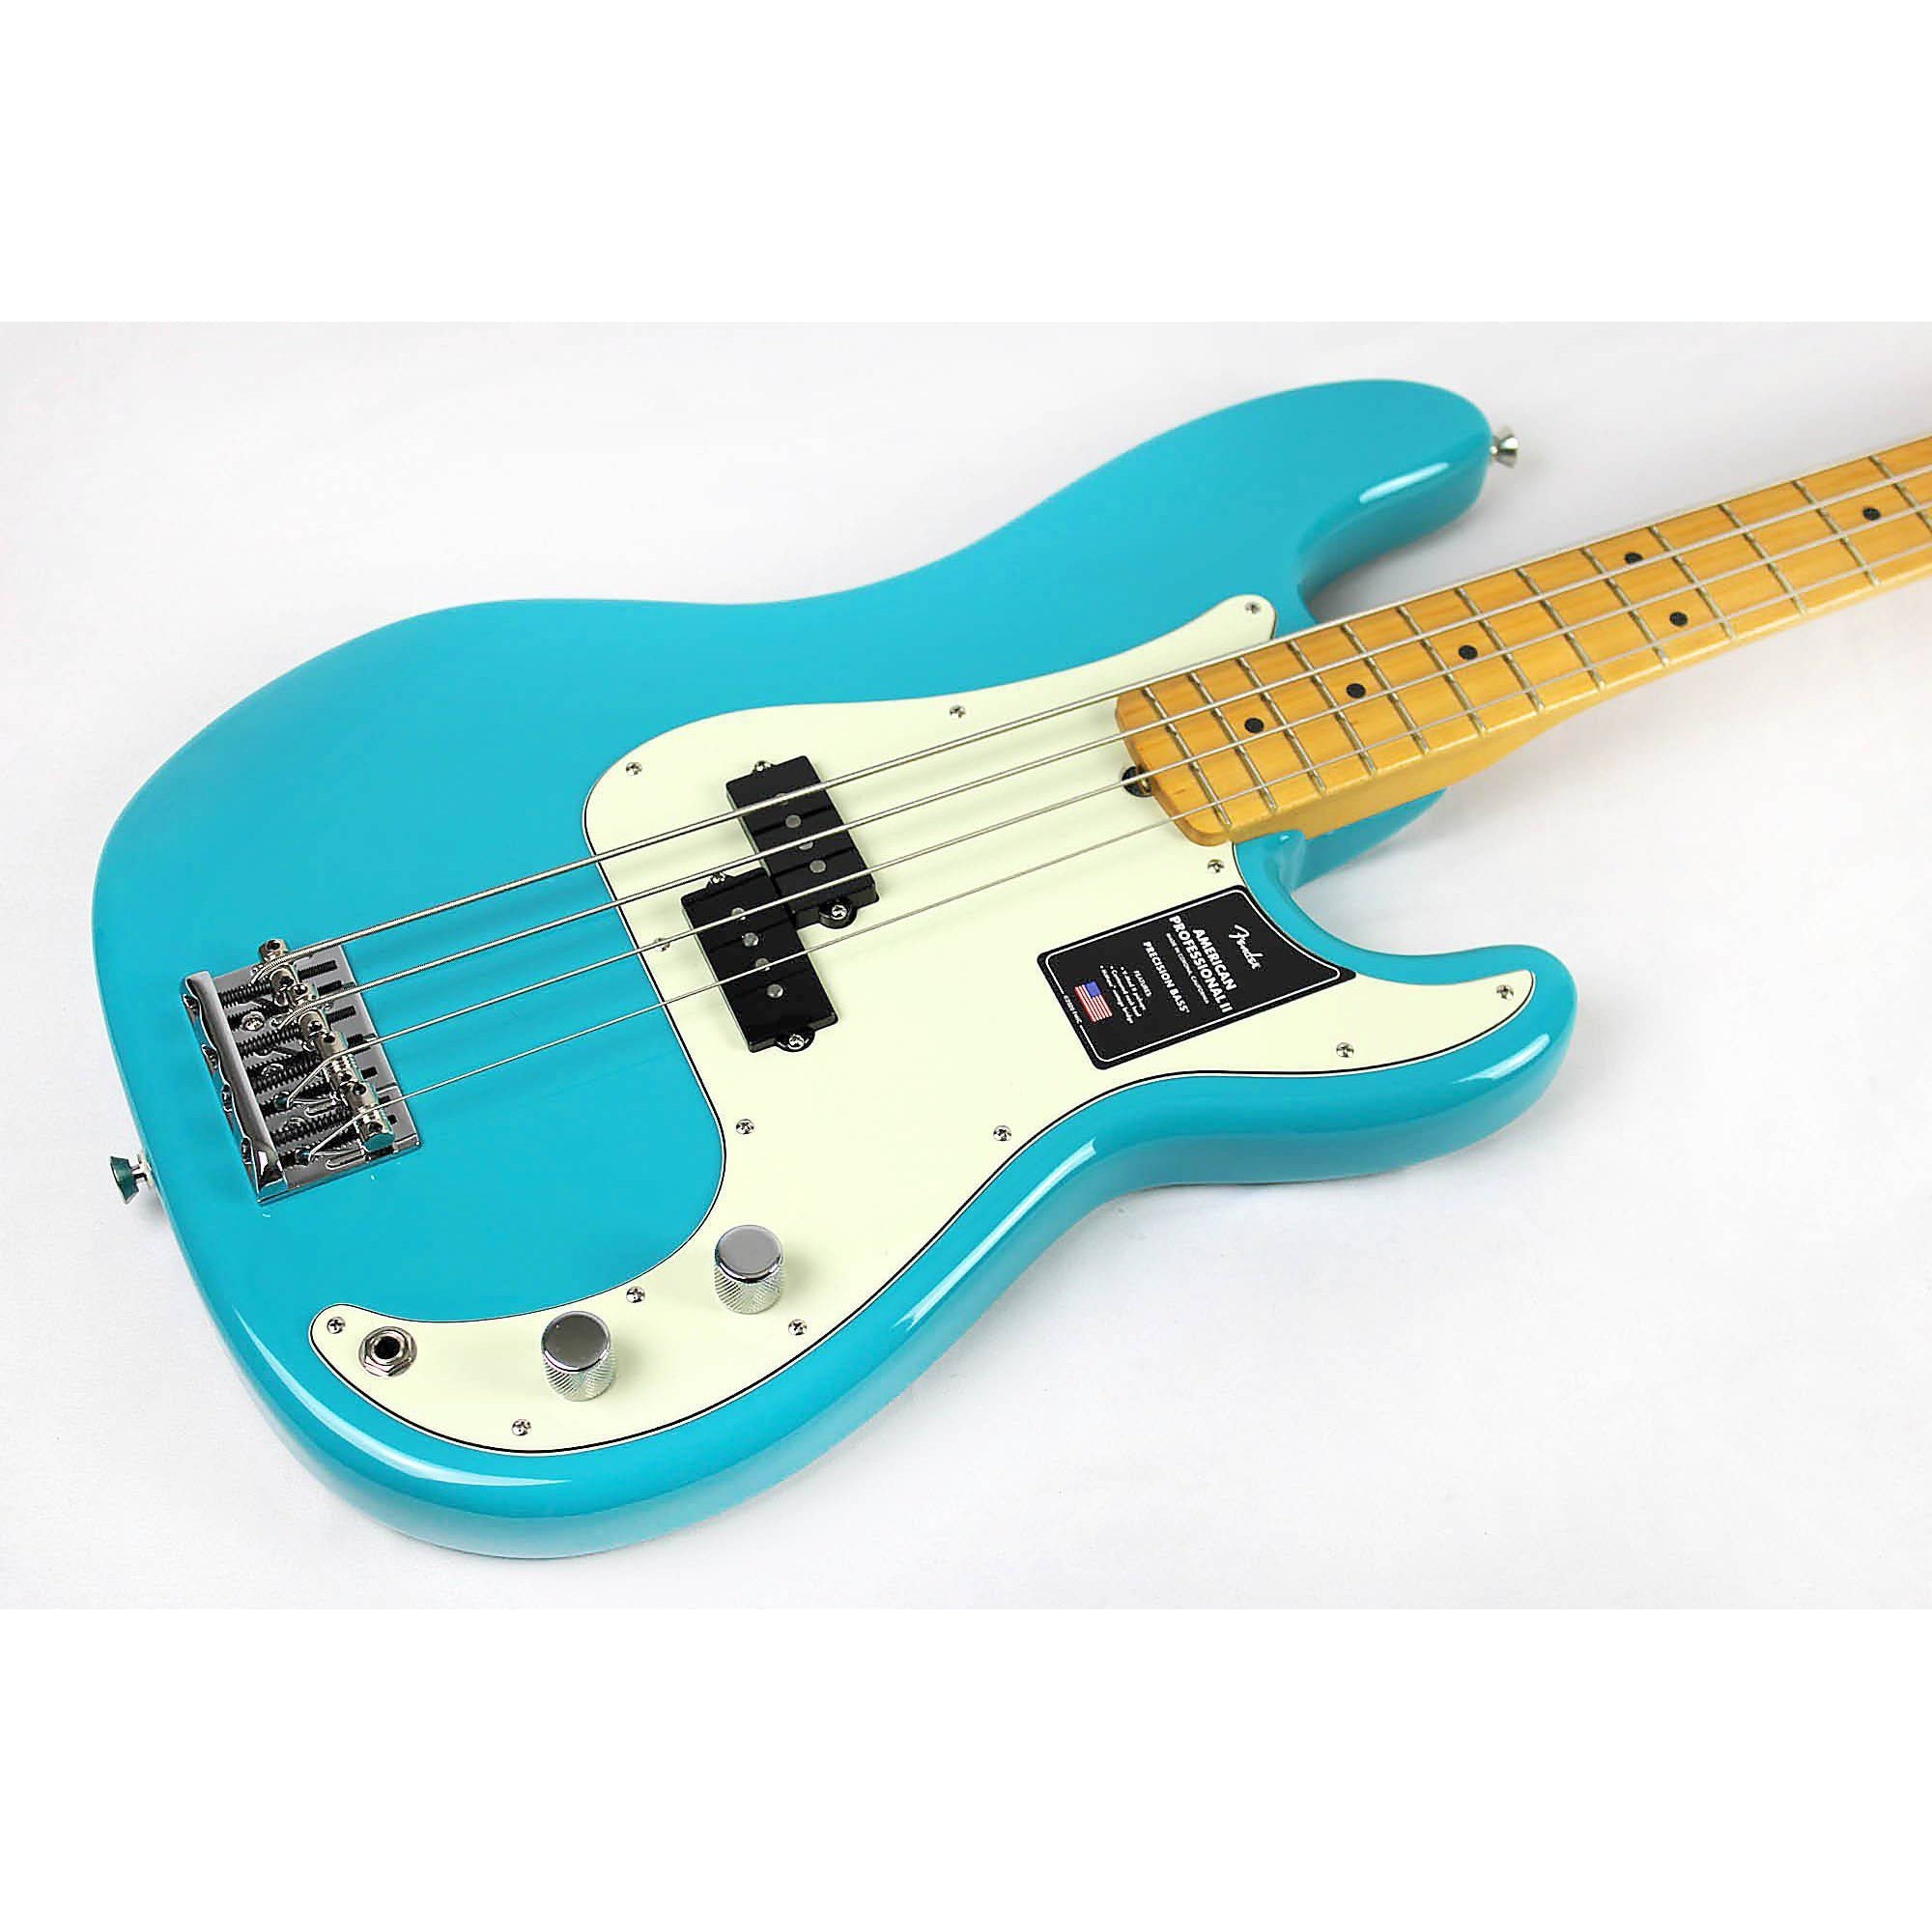 II　Maple　Professional　Leitz　Precision　Fender　Bass　Blue　Fingerboard　American　Music　Miami　with